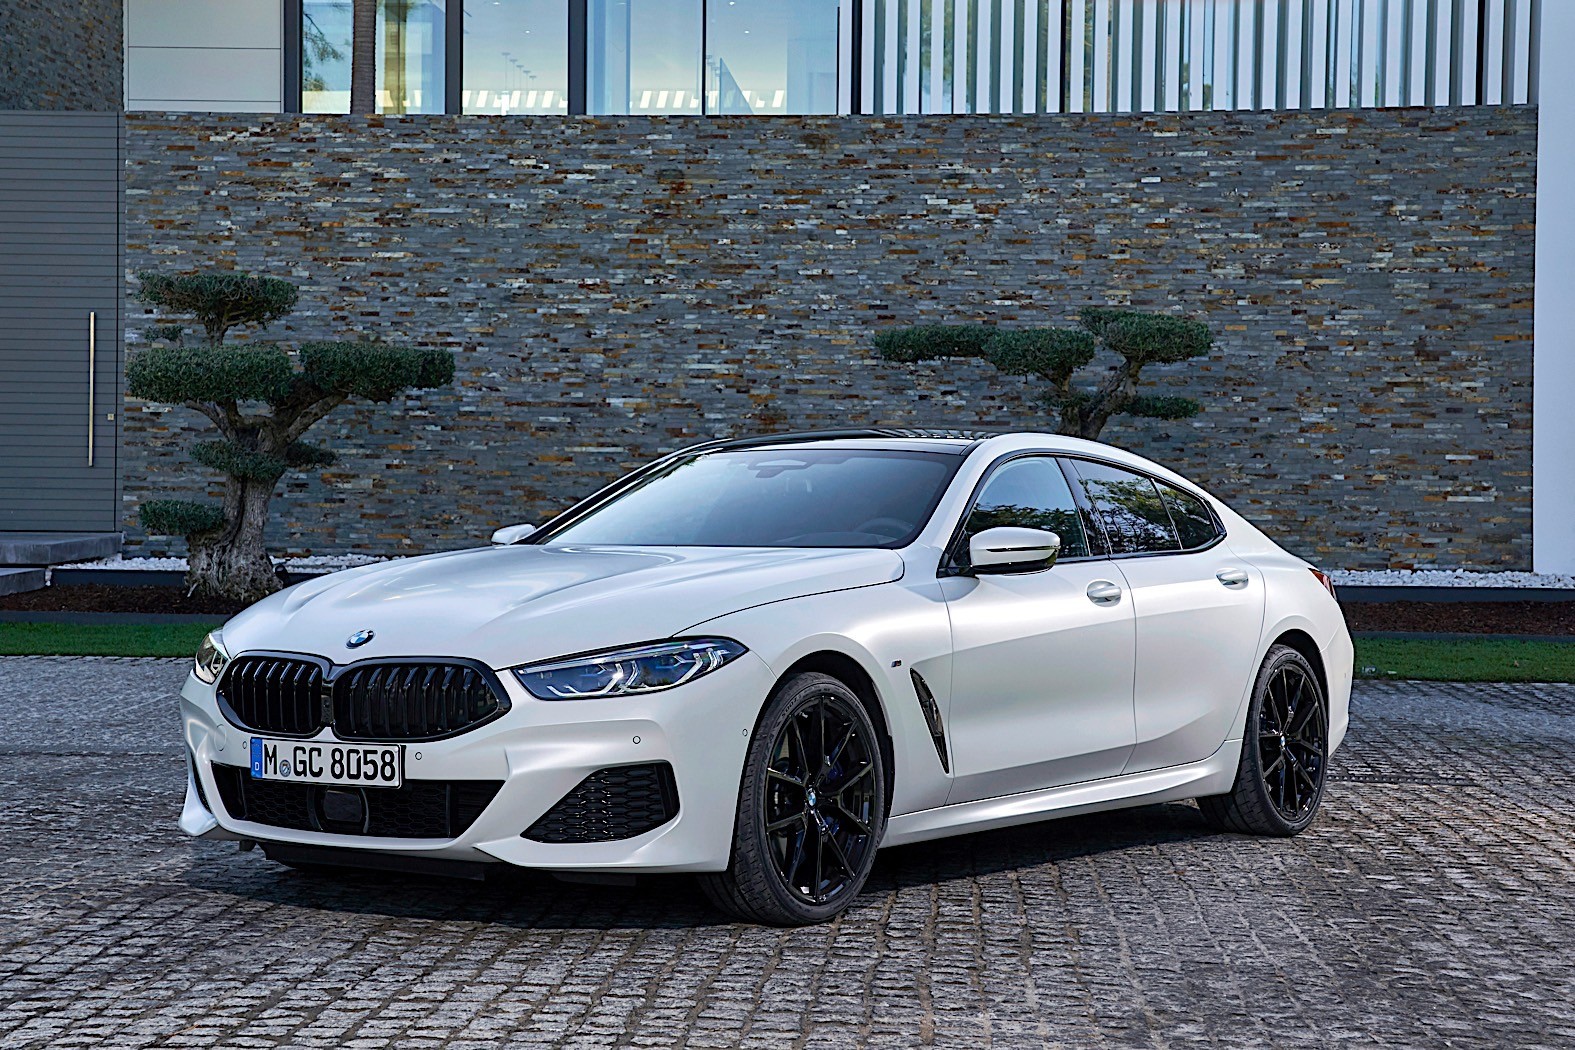 2020 BMW 8 Series Gran Coupe Goes All White in Portugal